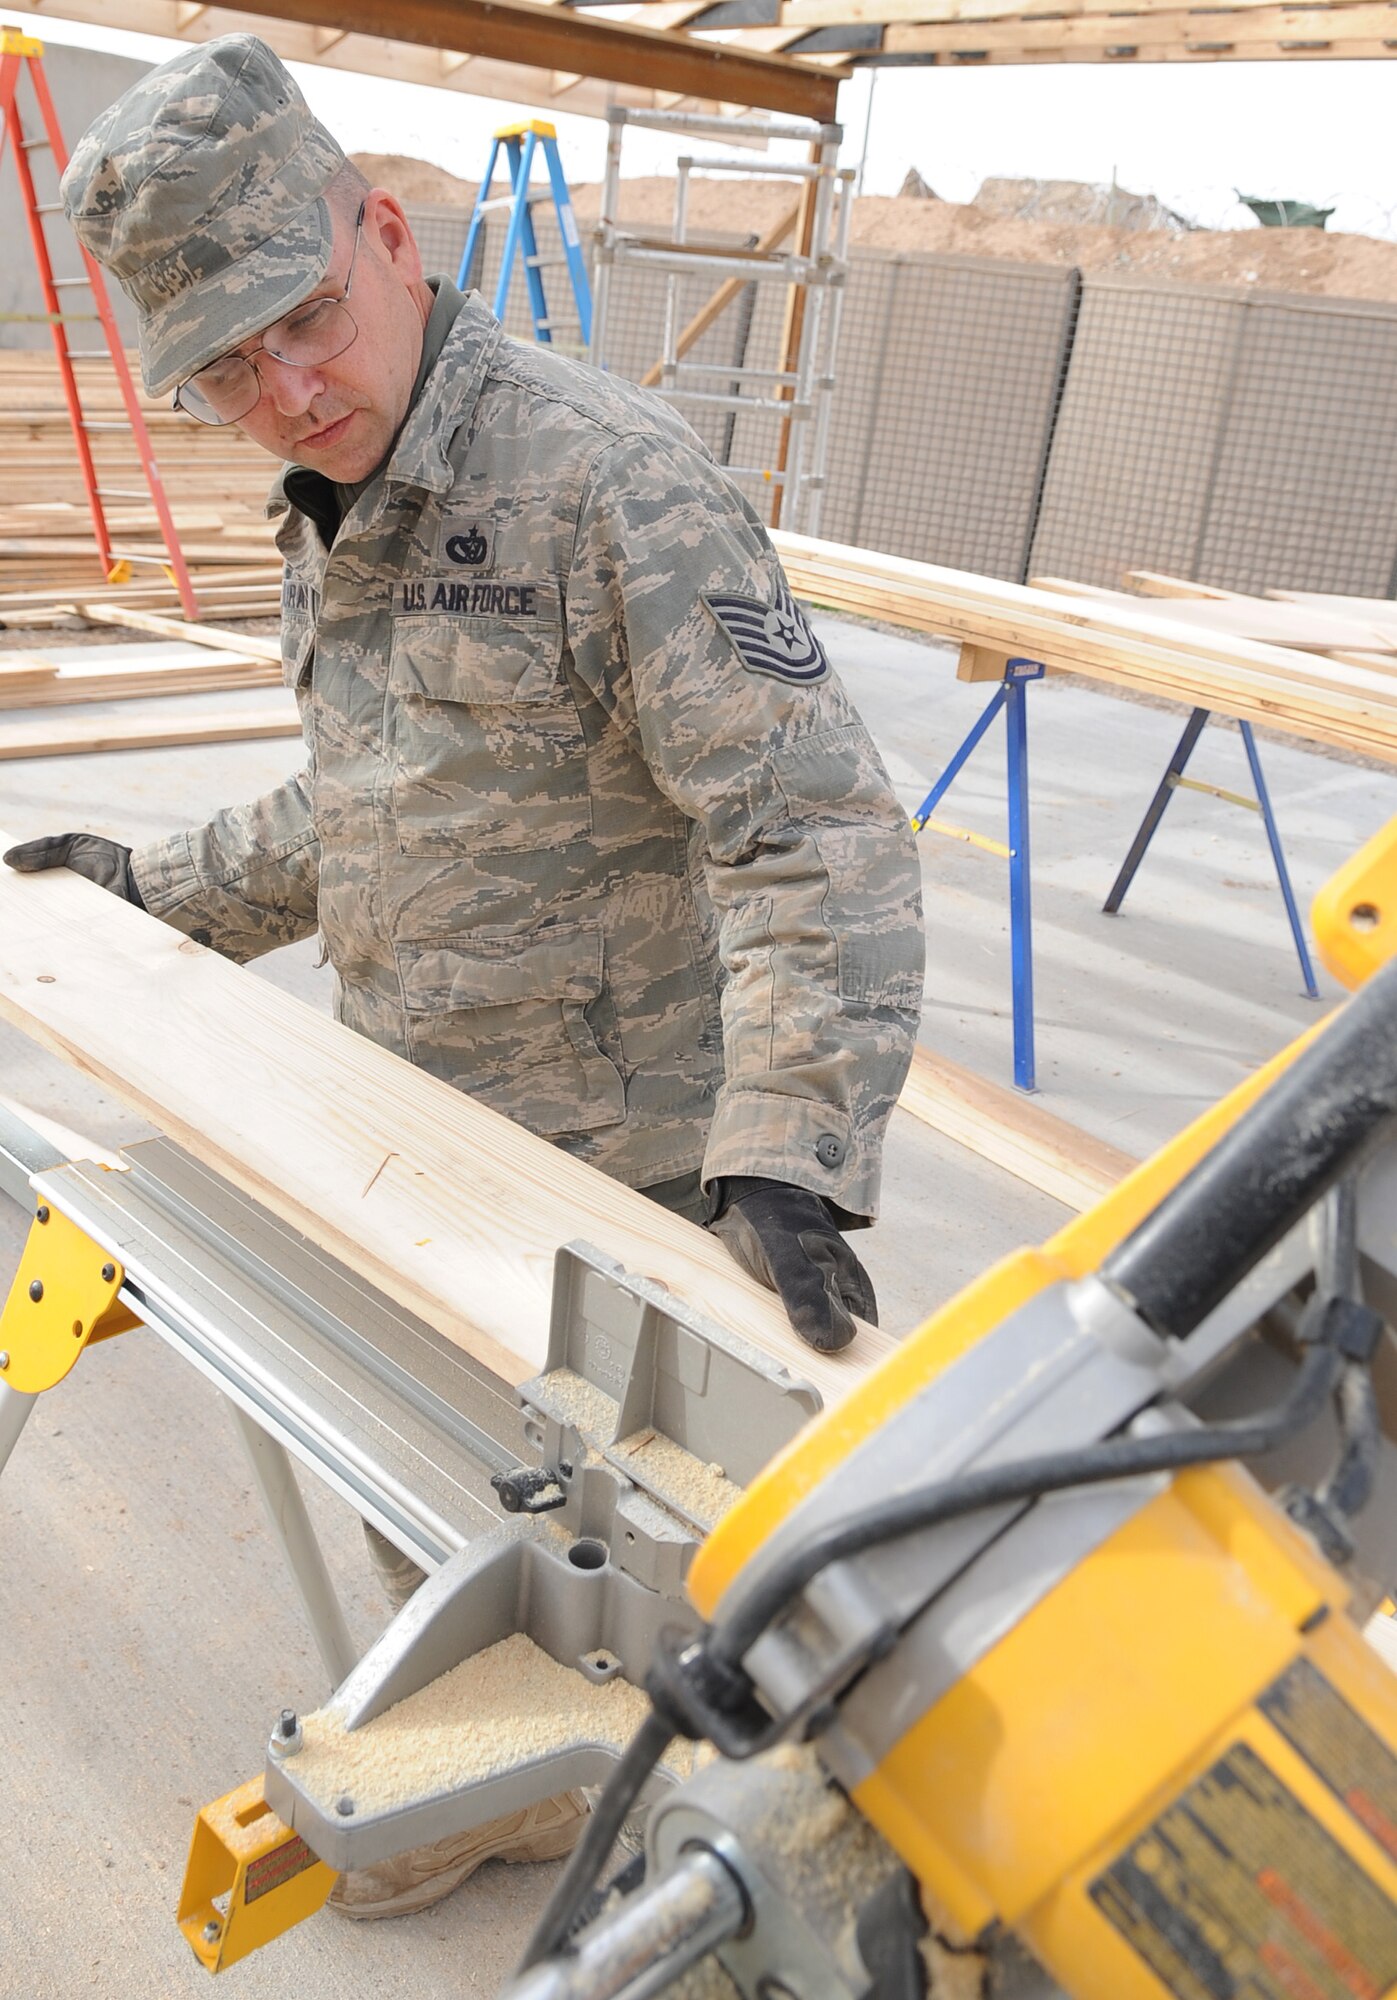 KIRKUK REGIONAL AIR BASE, Iraq – Tech. Sgt. Mark Duran, 506th Expeditionary Civil Engineer Squadron structures technician, builds support beams Jan. 28, 2010.  With a positive attitude and faith, Sergeant Duran is now six years cancer free and grateful for every moment. He is deployed from 301st CES Joint Reserve Field Carswell Fort Worth, Texas. (U.S. Air Force photo/Staff Sgt. Tabitha Kuykendall)	